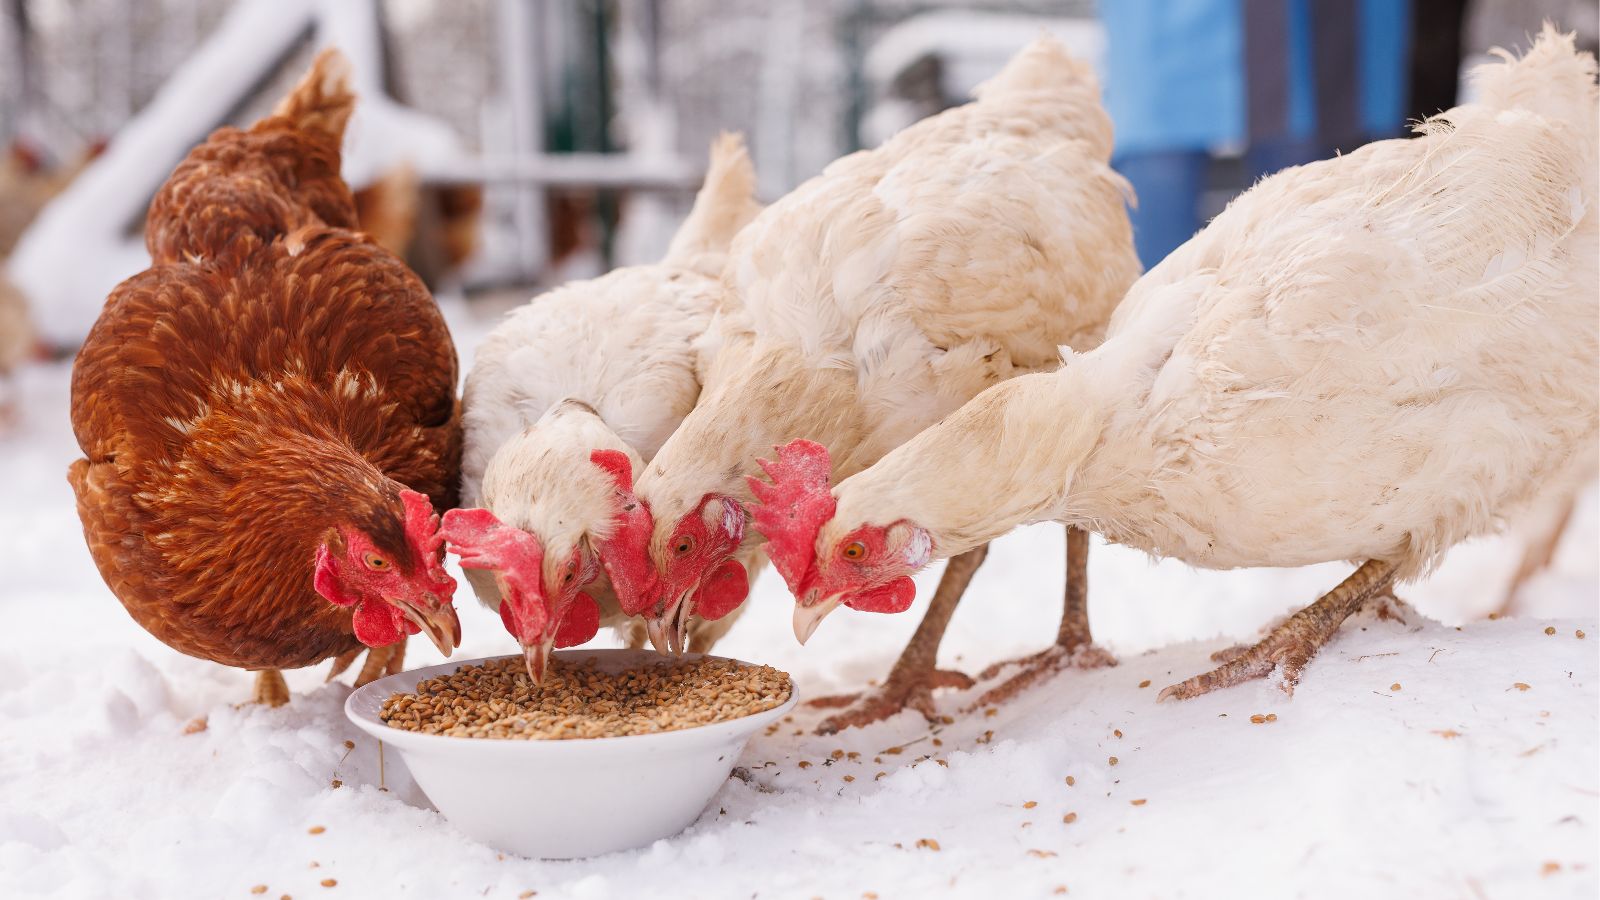 Free-range chickens enjoying winter feed from a bowl.